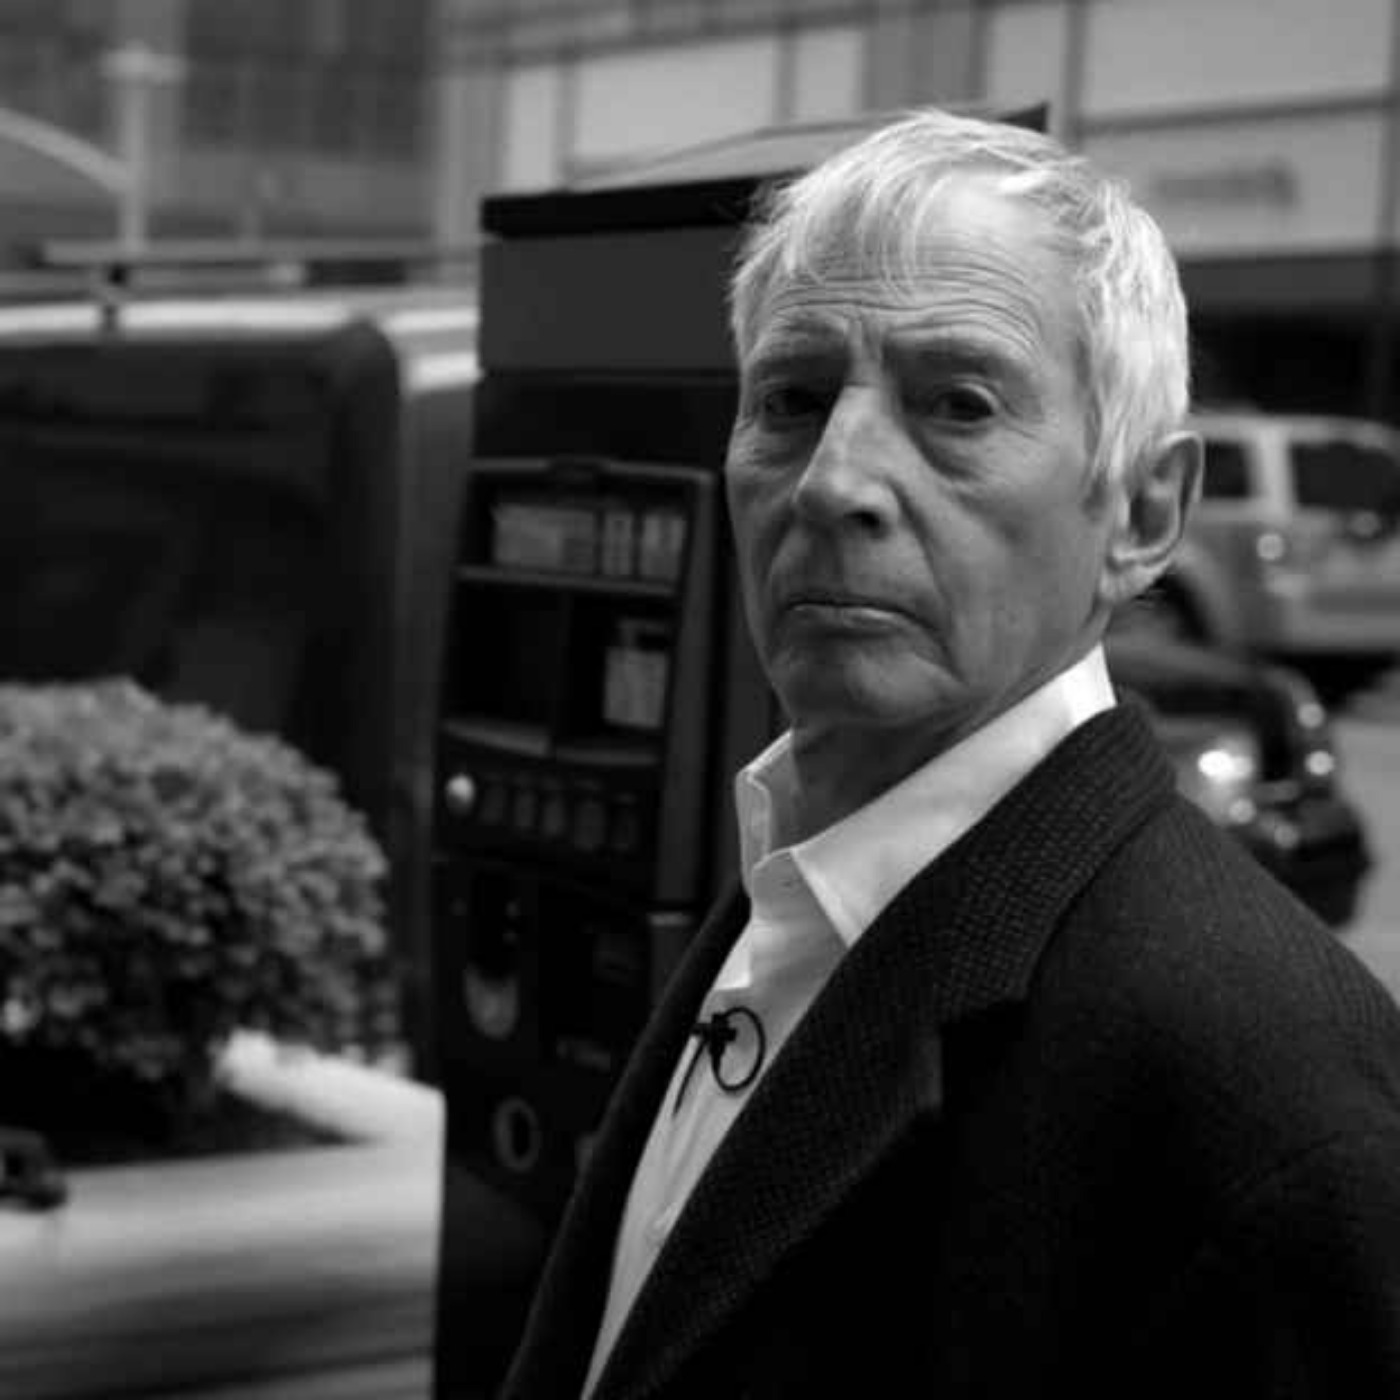 Ep. 15 - 'The Jinx: Season 2' Is About How Awesome 'The Jinx: Season 1' Was